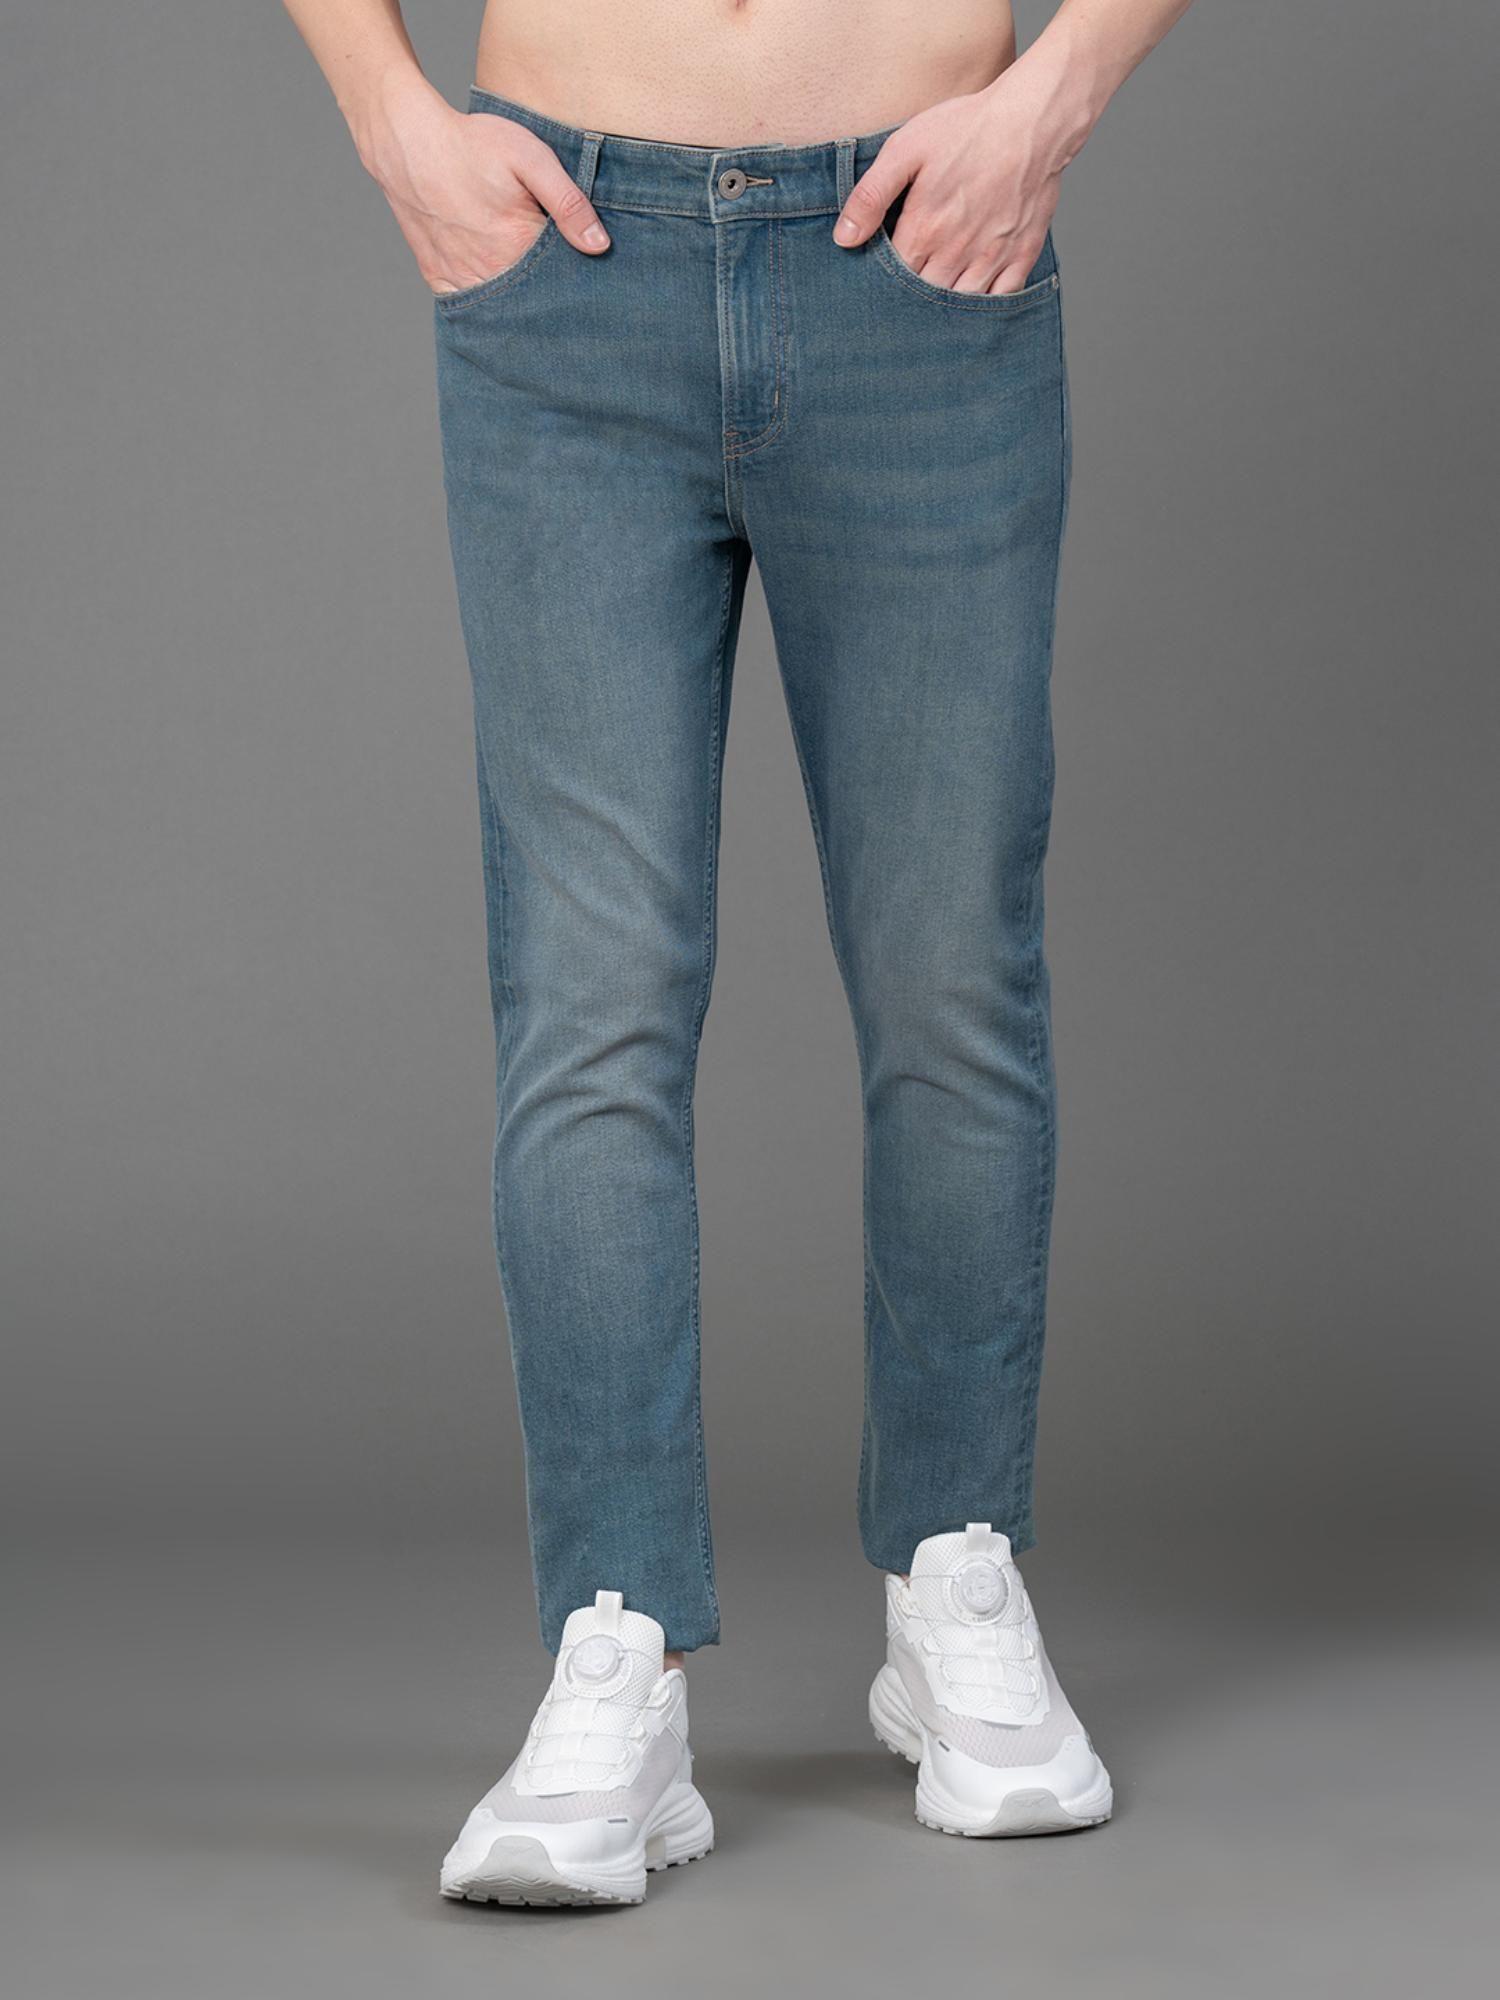 tinted-light-blue-cotton-spandex-solid-washed-mens-regular-fit-jeans